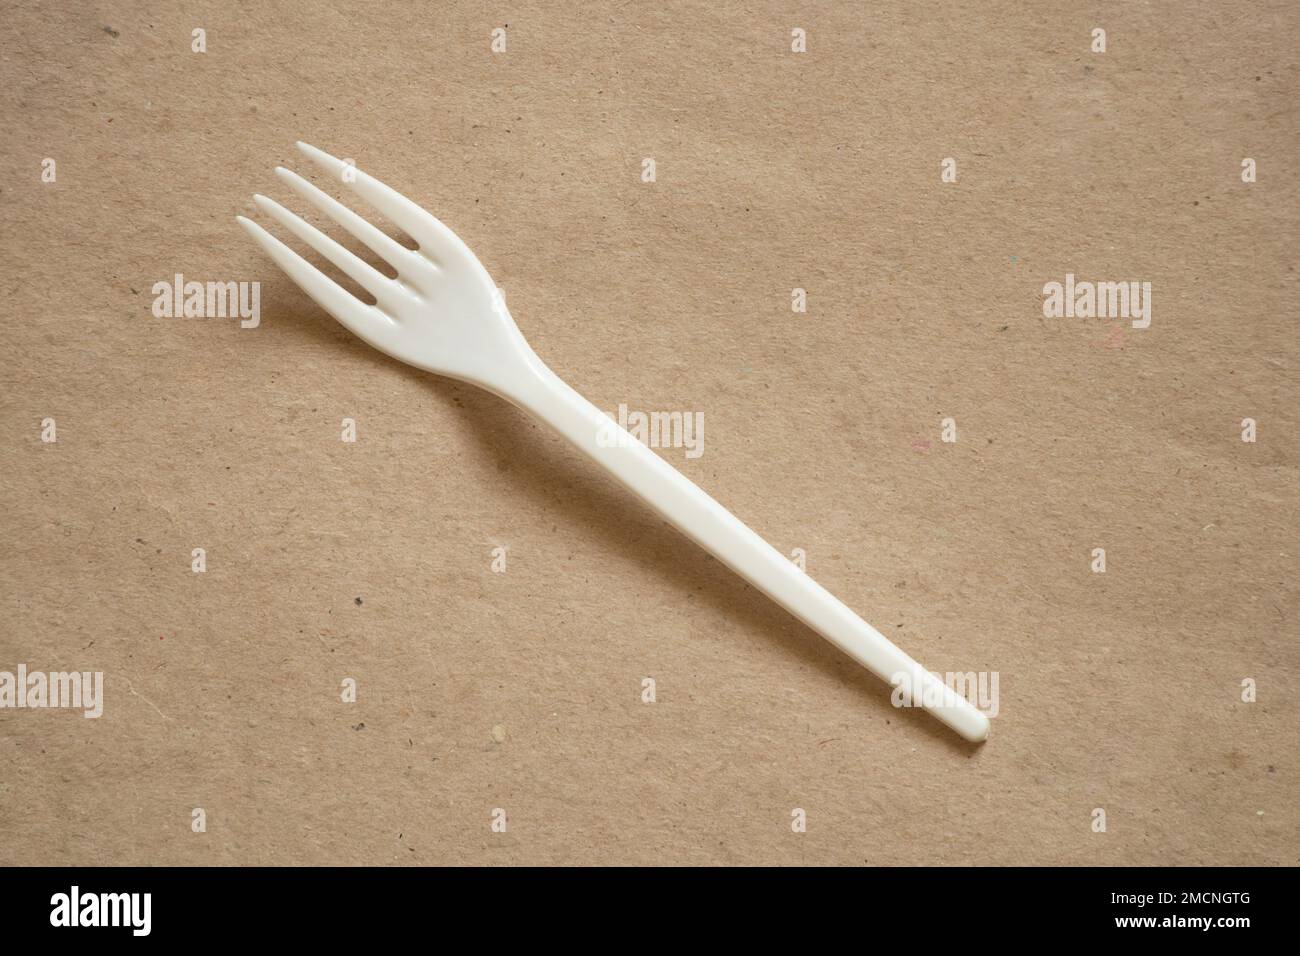 plastic disposable fork on isolated background, disposable tableware and appliances Stock Photo